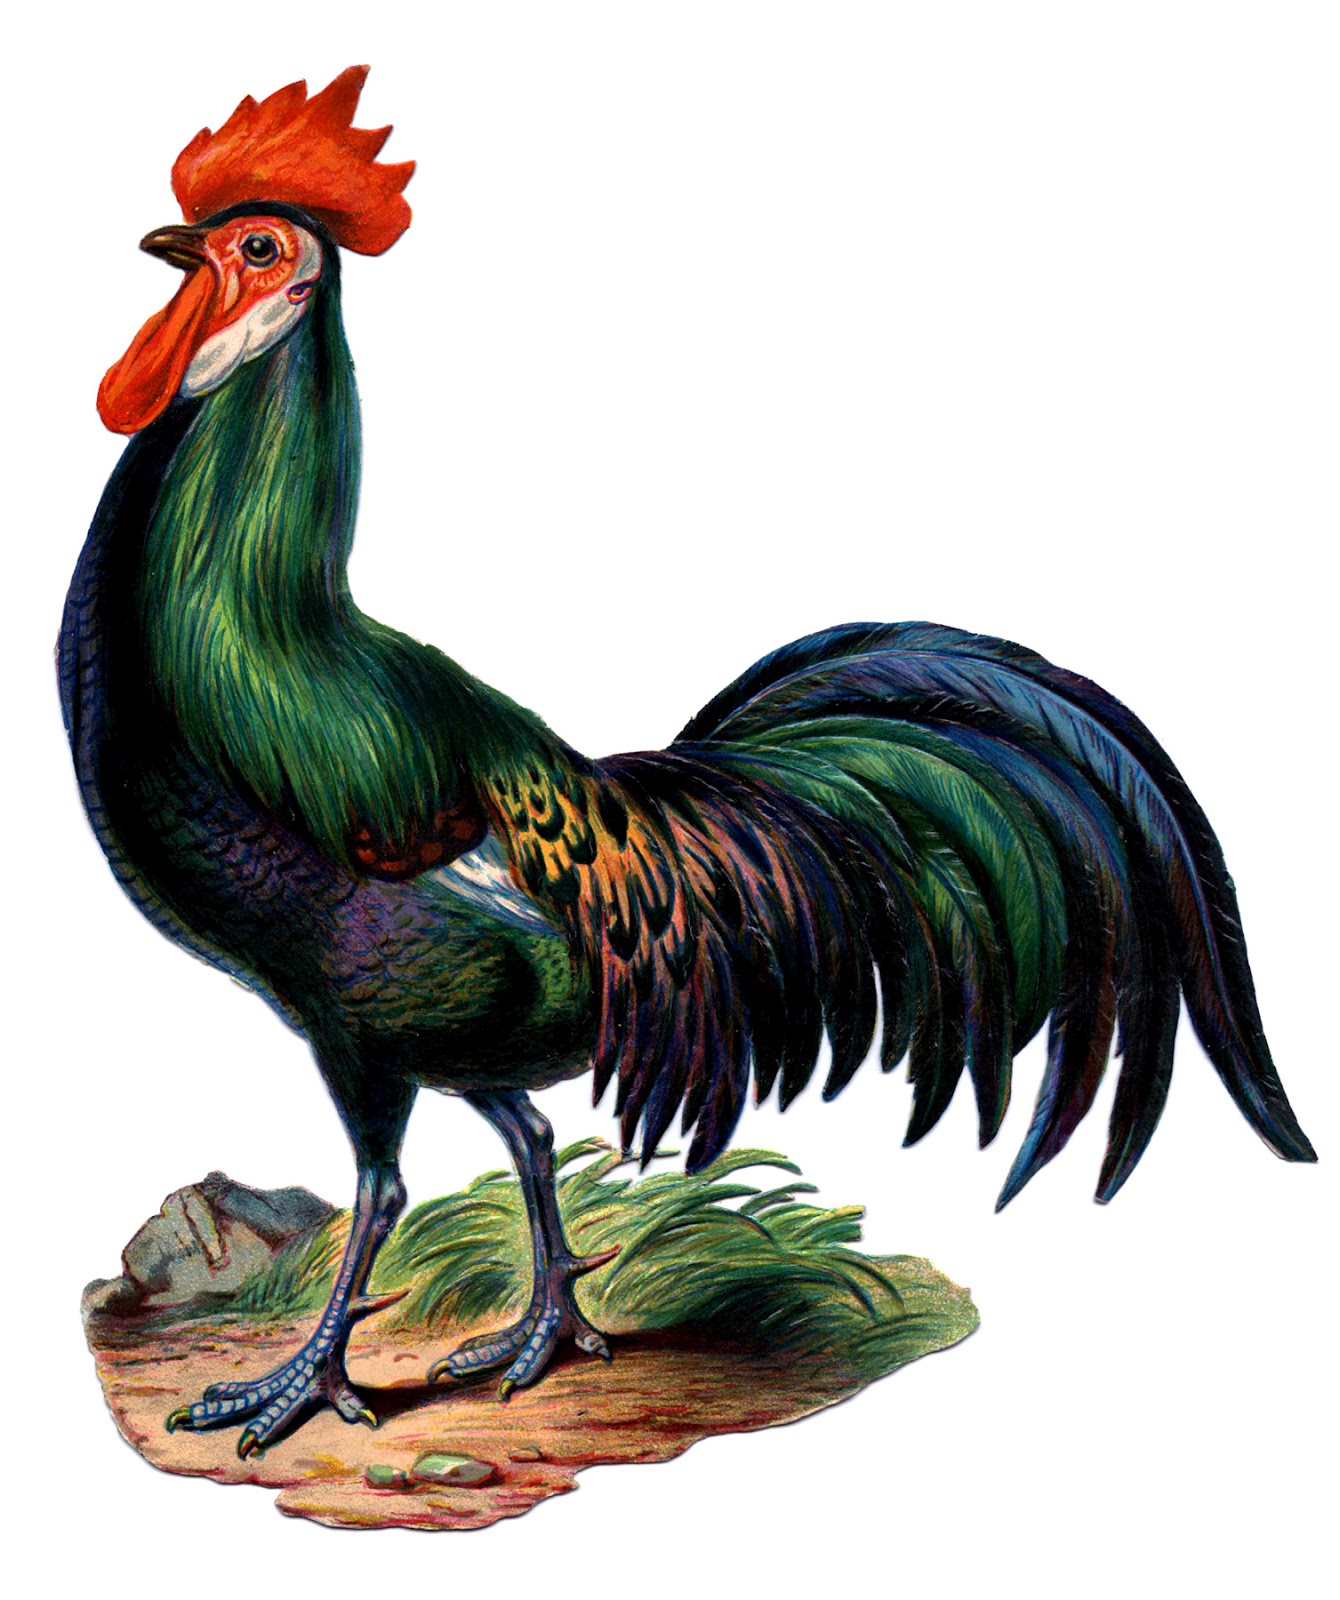 red rooster clipart - photo #38